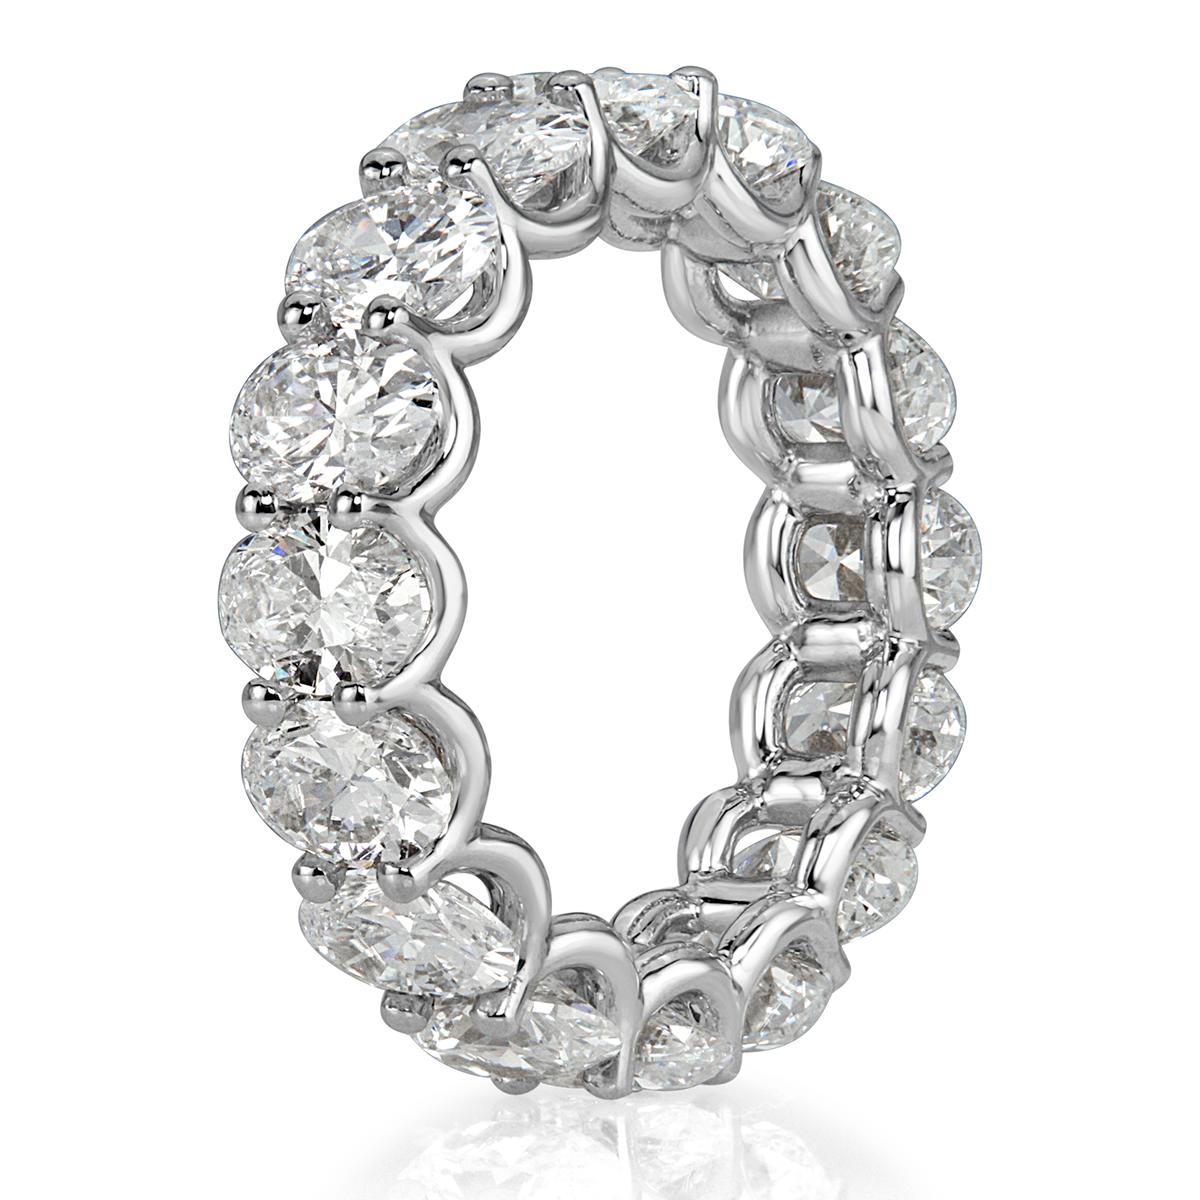 This stunning diamond eternity band showcases 6.45ct of oval cut diamonds graded at E-F in color, VS1-VS2 in clarity. The diamonds are expertly hand set in a 